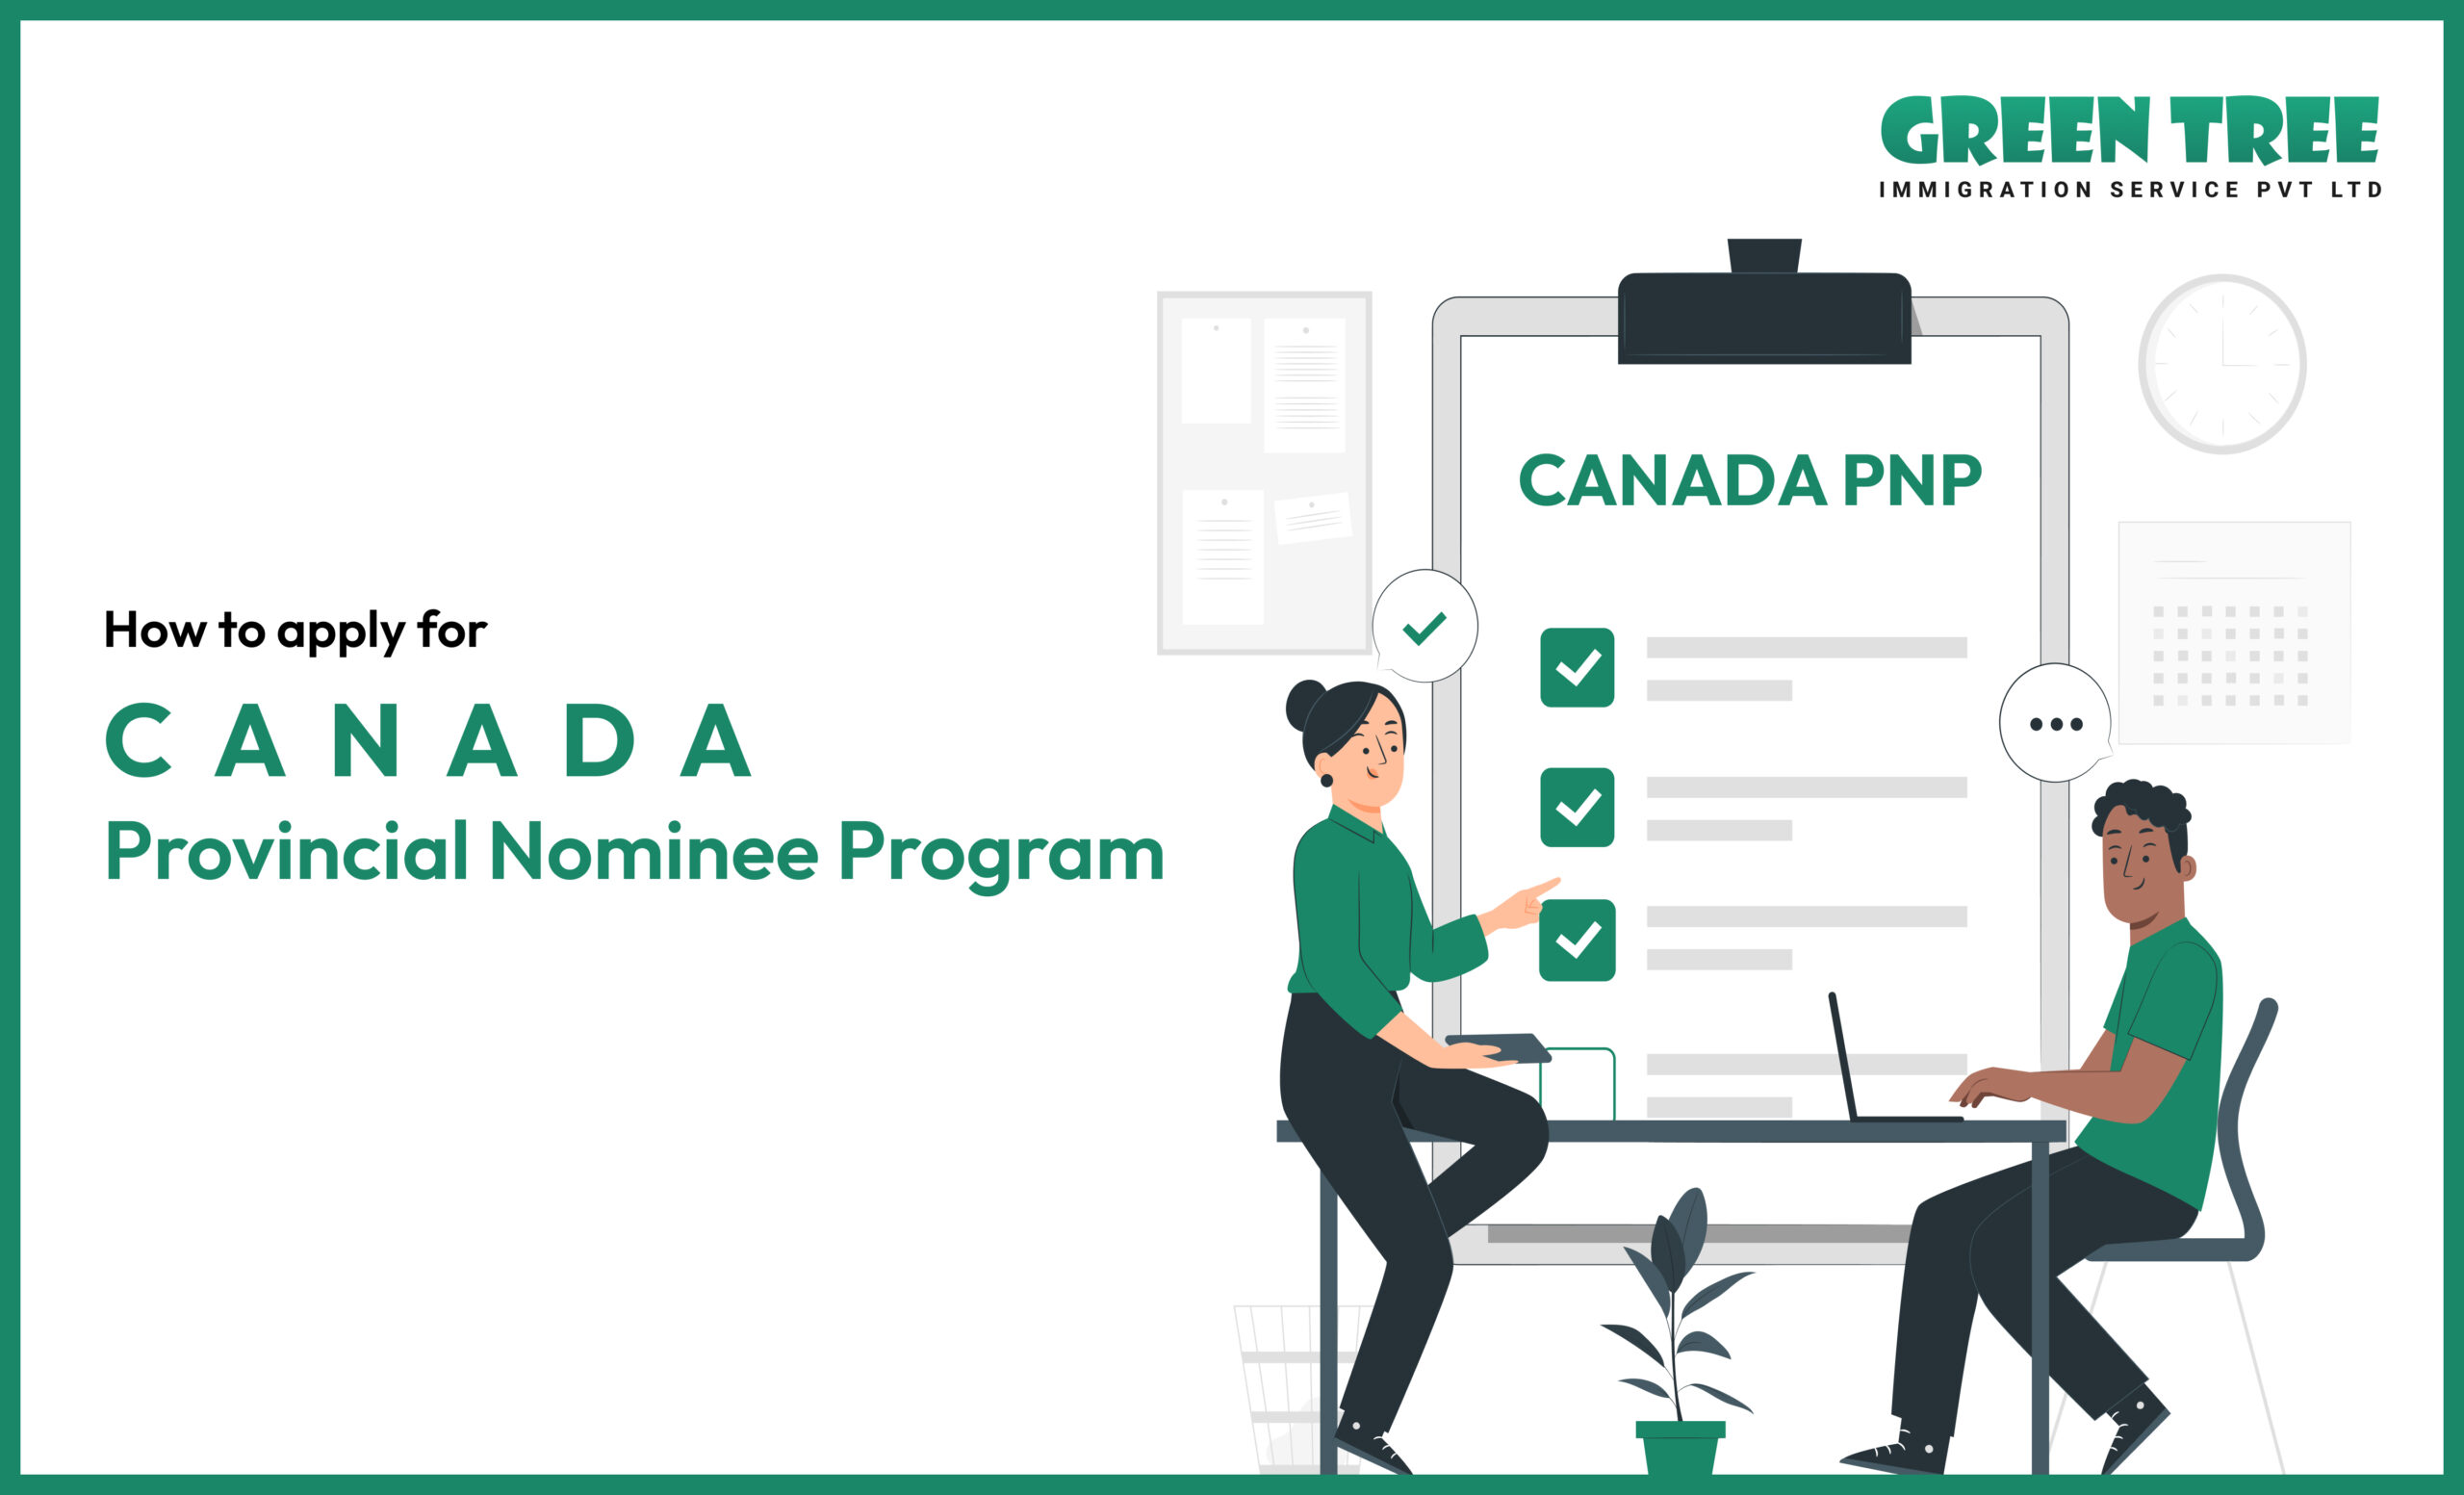 How to apply for Canada PNP